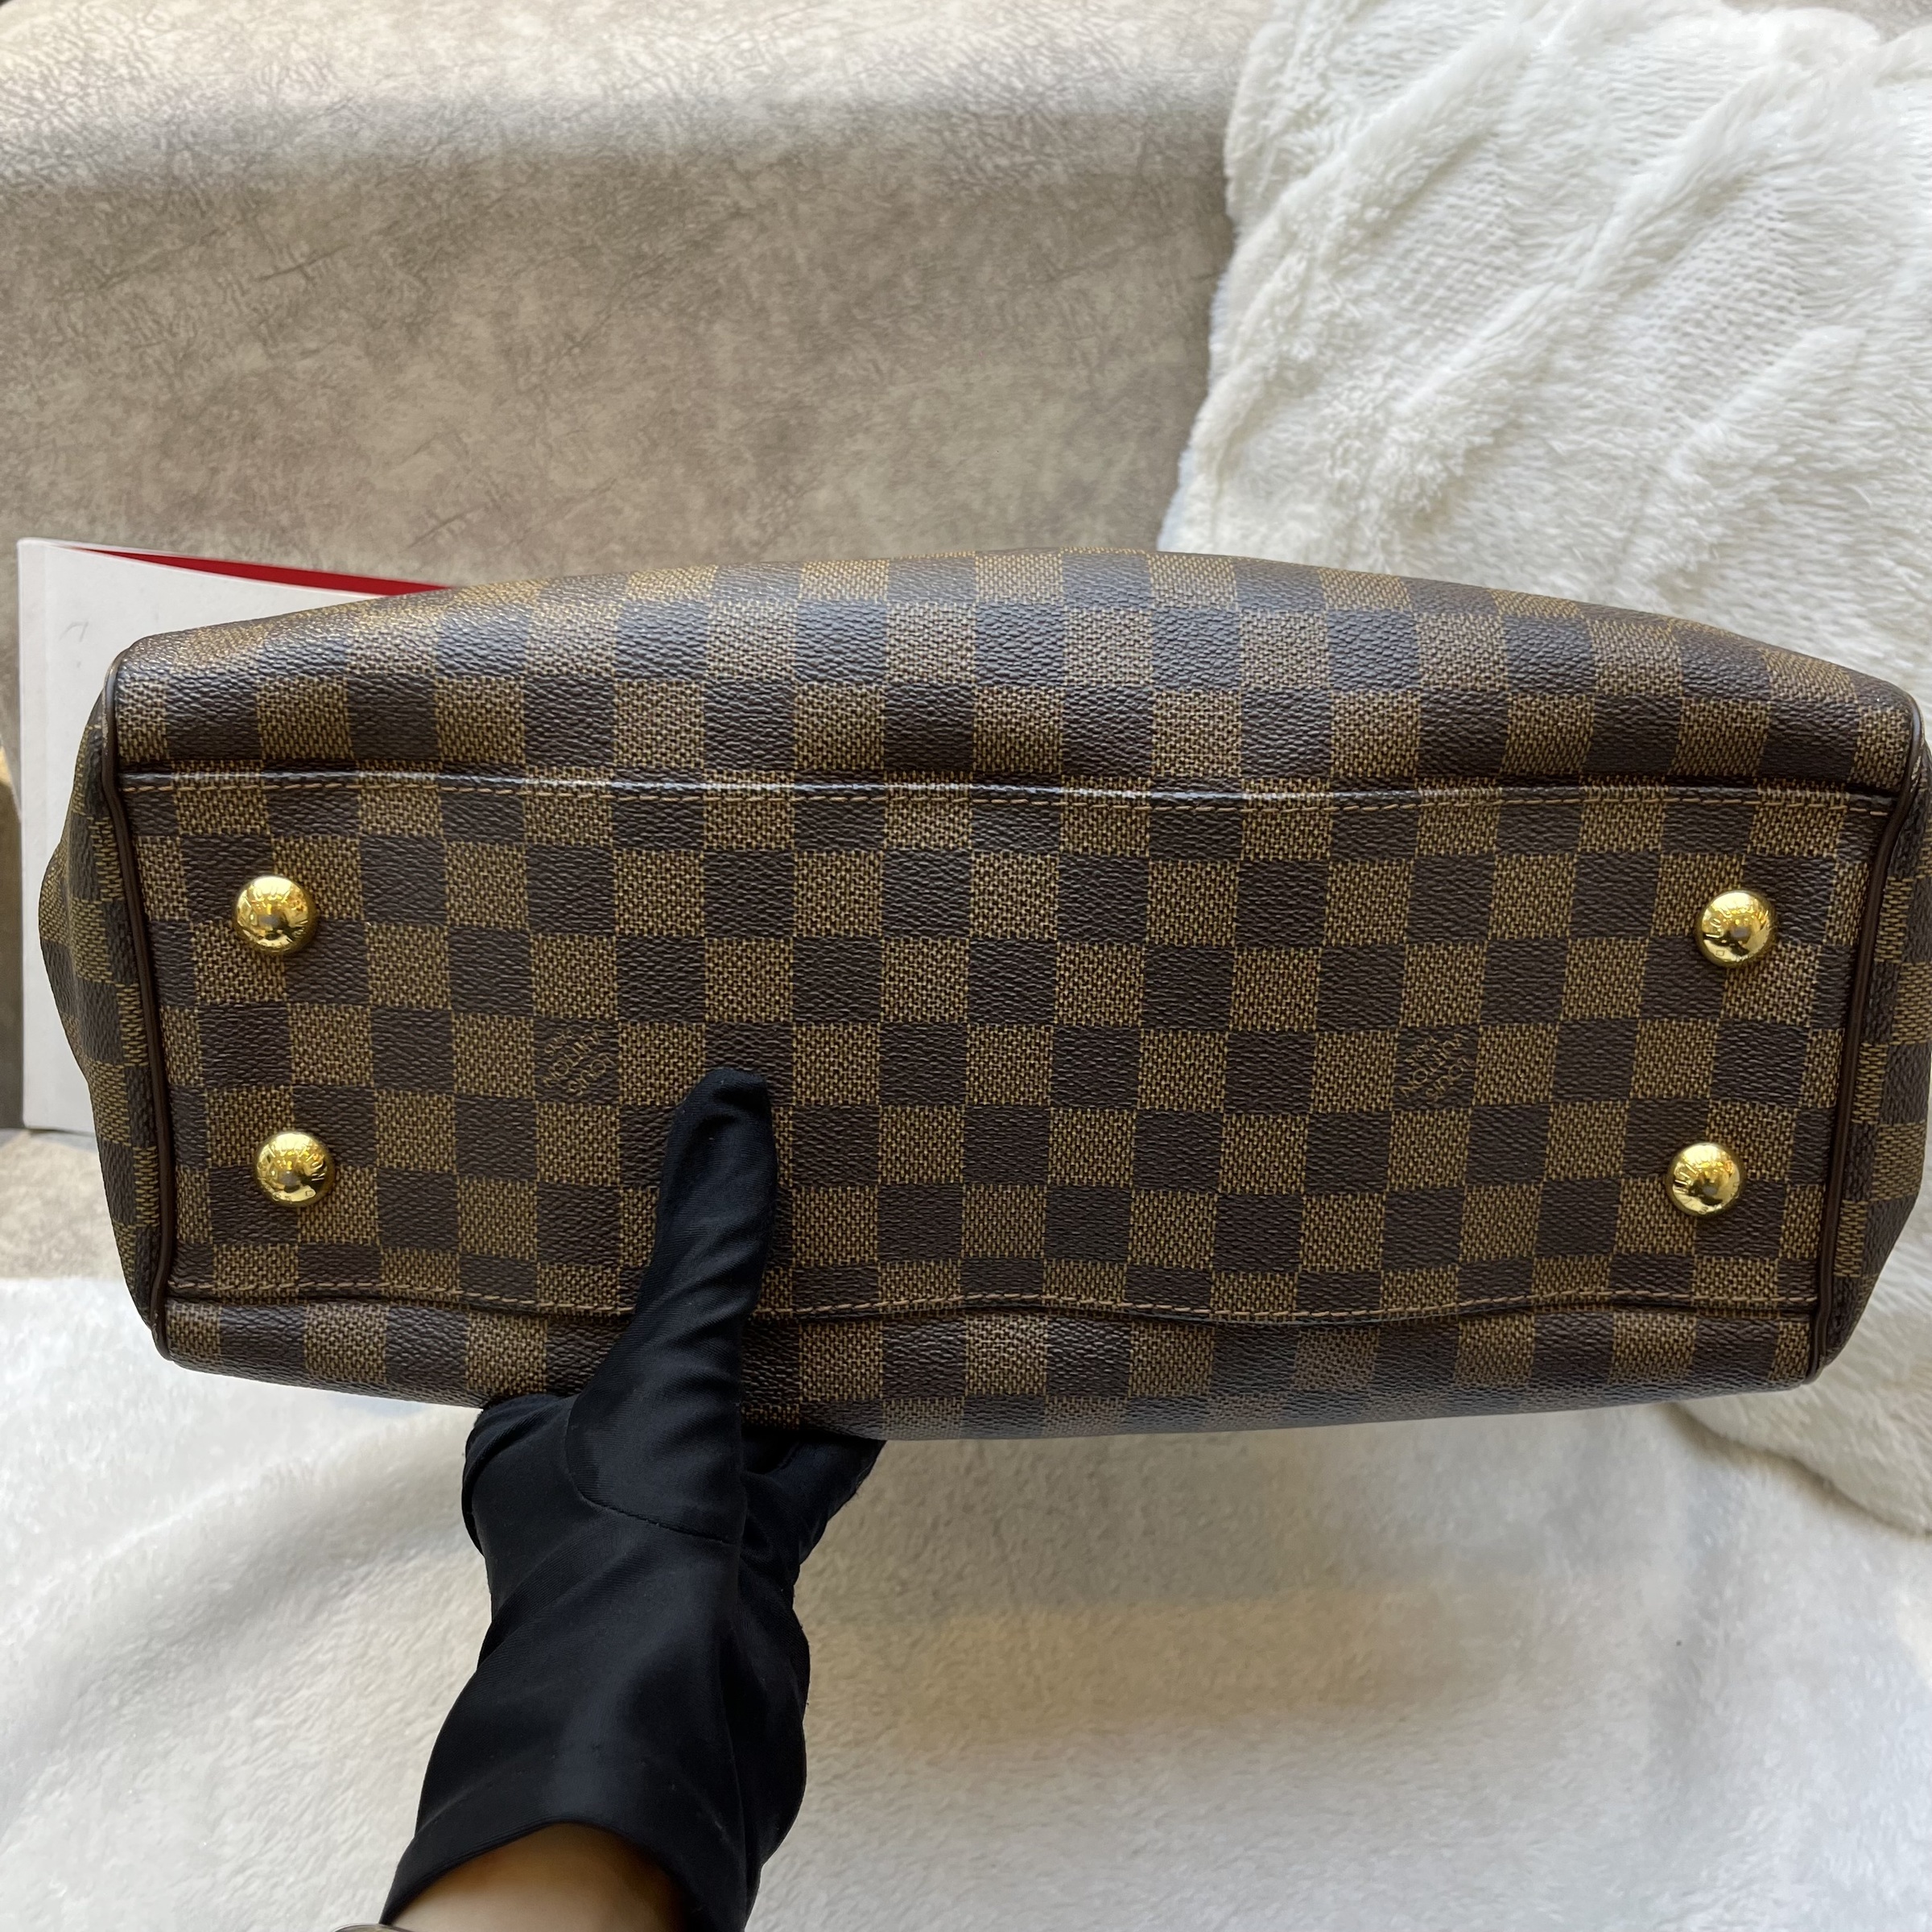 Buy Pre-owned & Brand new Luxury Louis Vuitton Trevi PM in Damier